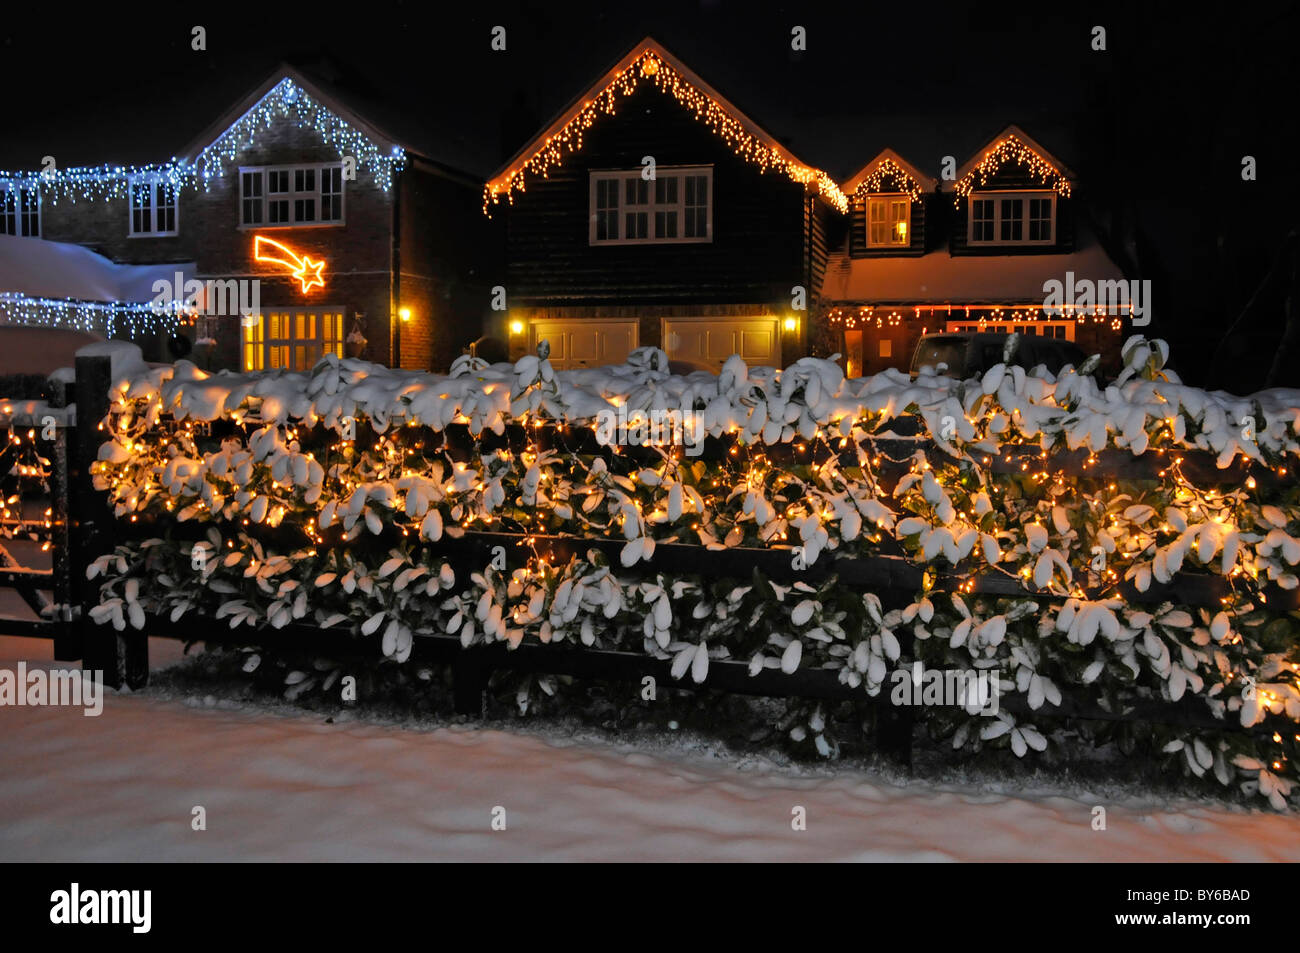 Snow covered front garden laurel hedge winter scene white Christmas lights decorations and illuminations on house gable end beyond Essex England UK Stock Photo